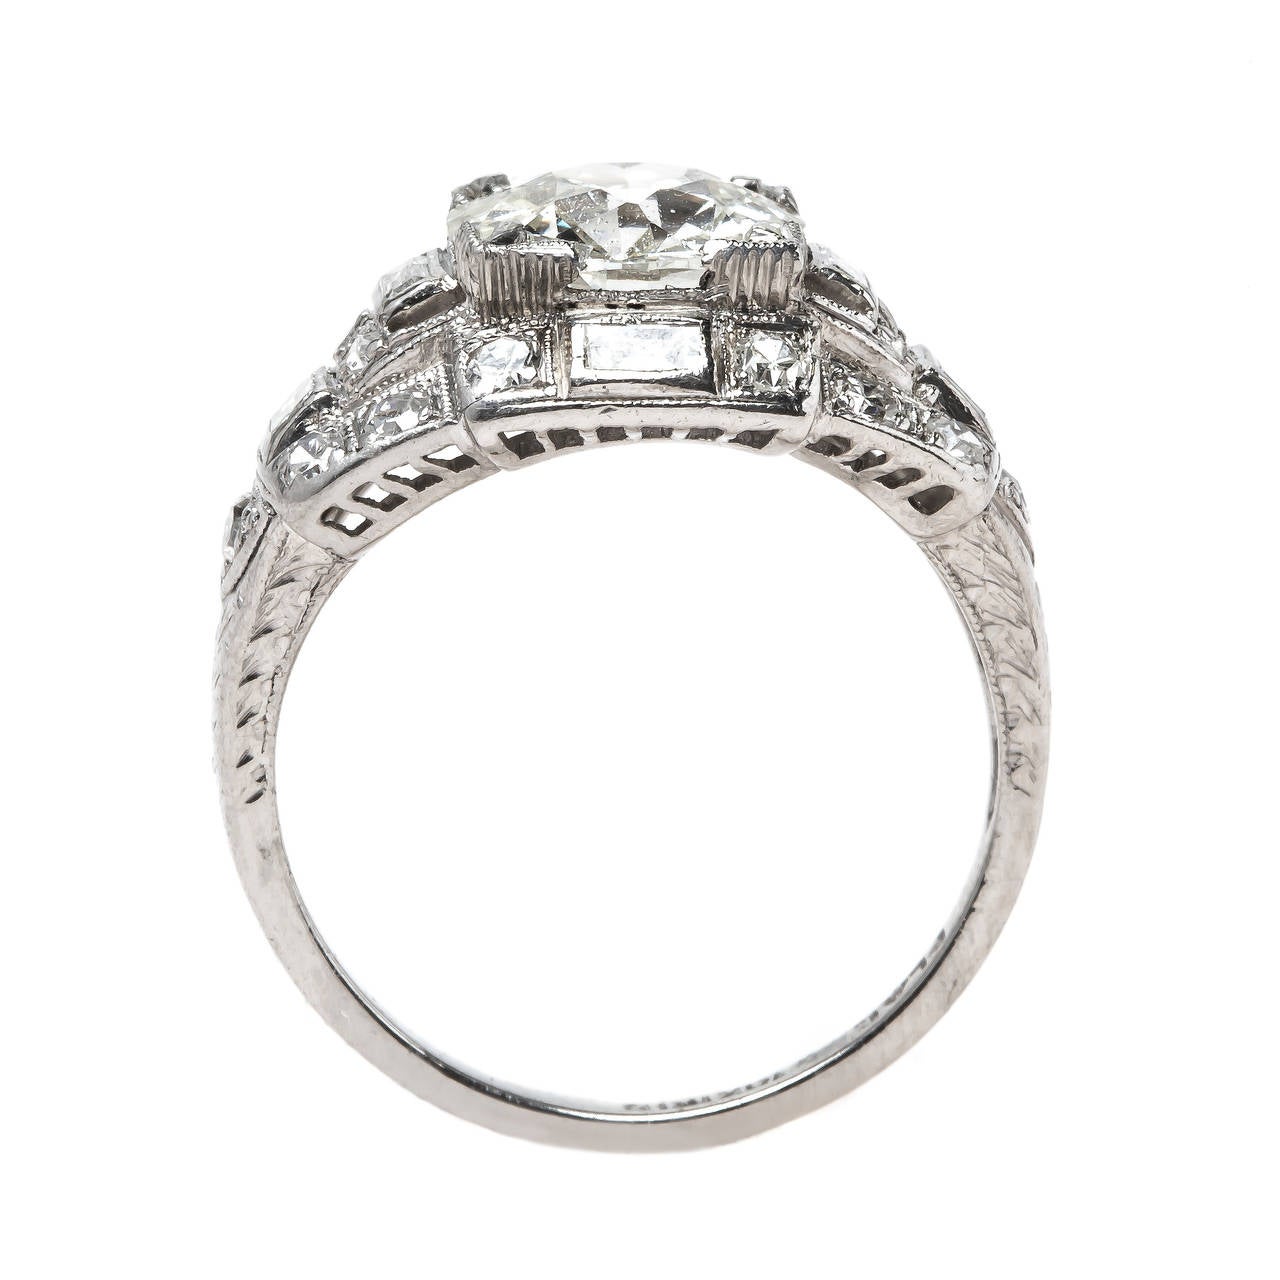 Casablanca is a fabulous authentic Art Deco era (circa 1930) diamond engagement ring made from platinum and centering a box-set 1.86ct GIA certified Old European Brilliant Cut diamond graded K color and SI1 clarity. Everything about this ring